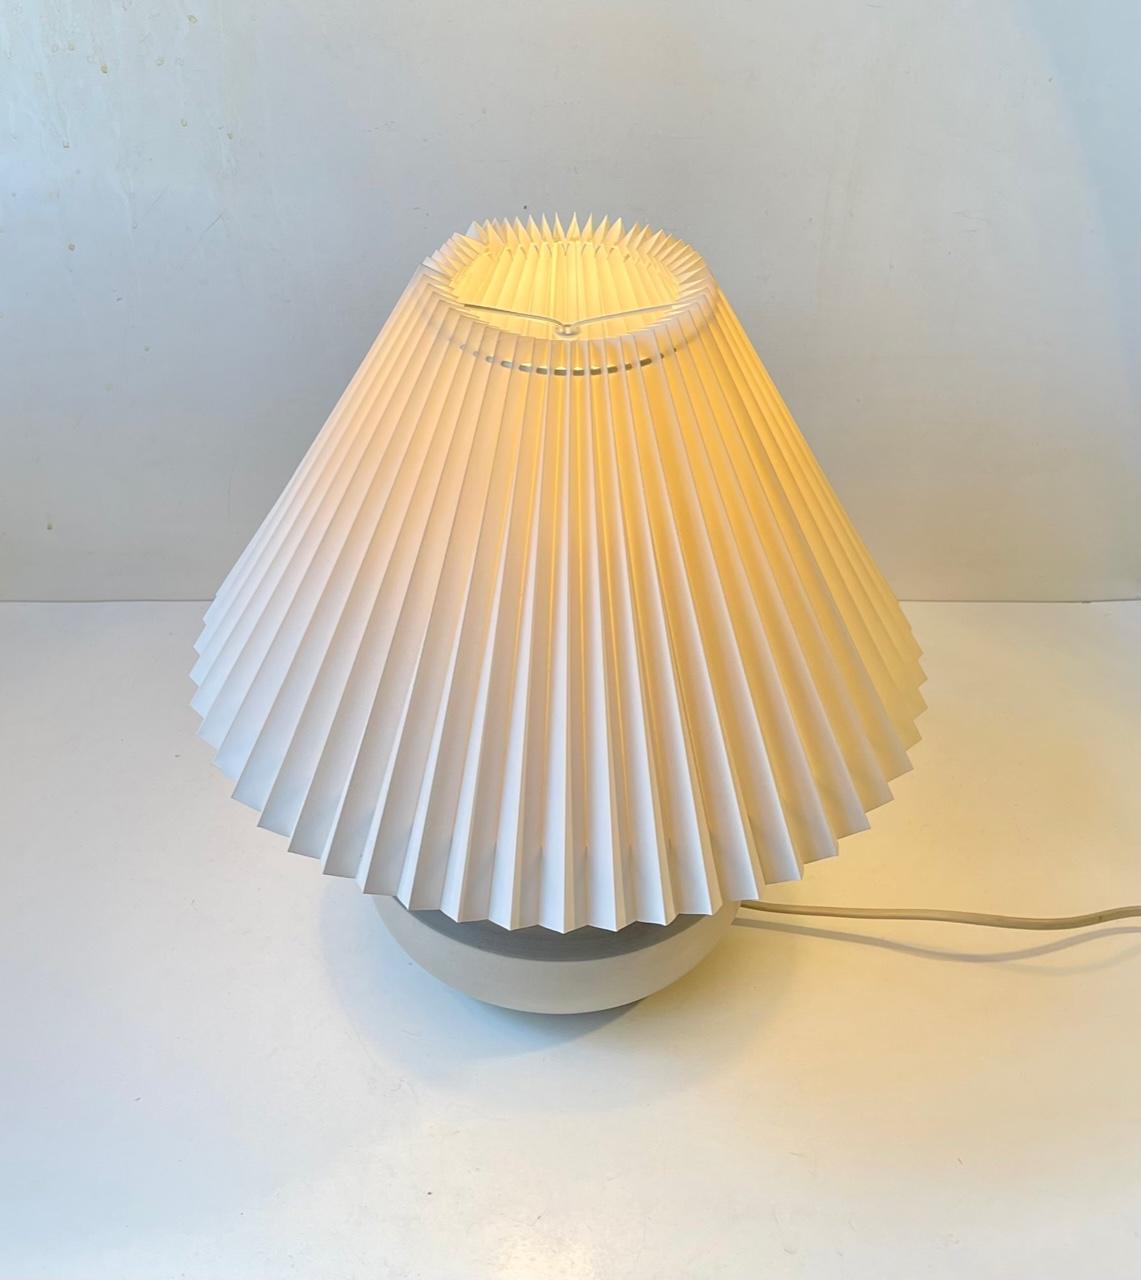 Scandinavian Modern Vintage Danish Stoneware Table Lamp with Stripes by Axella Design, 1970s